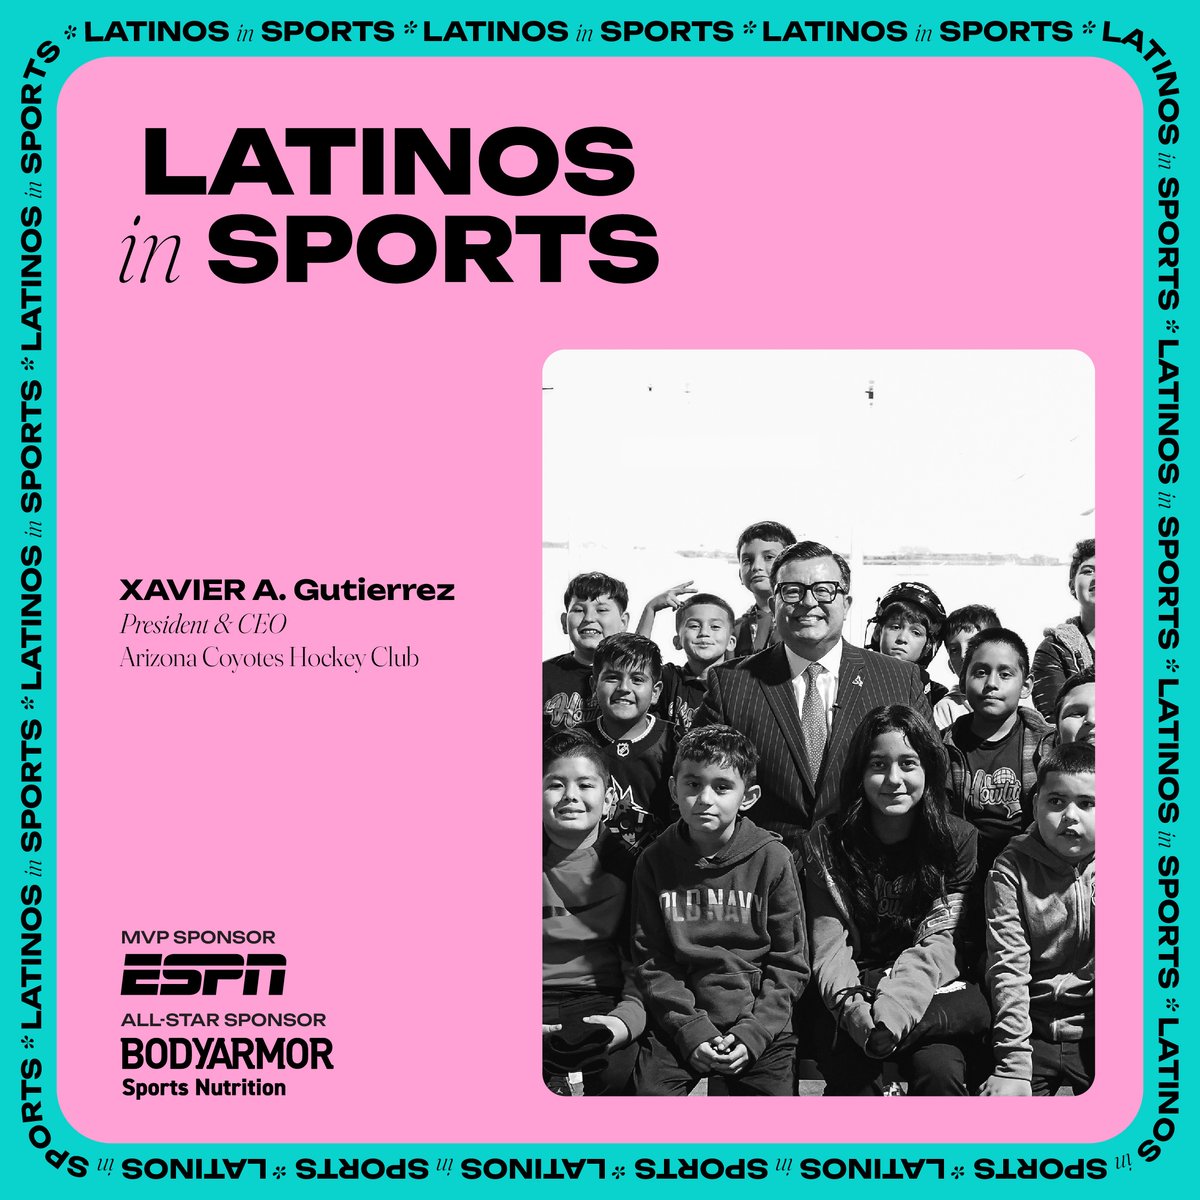 🌟 Honored to be featured in @HispanicExecMag's Latinos in Sports series, celebrating our impact on sports. Join our conversation reshaping the sports industry & culture in America. Explore the series: hispanicexecutive.com/latinos-in-spo… #HispanicExecMag #LatinosInSports  🙌🏆🇺🇸